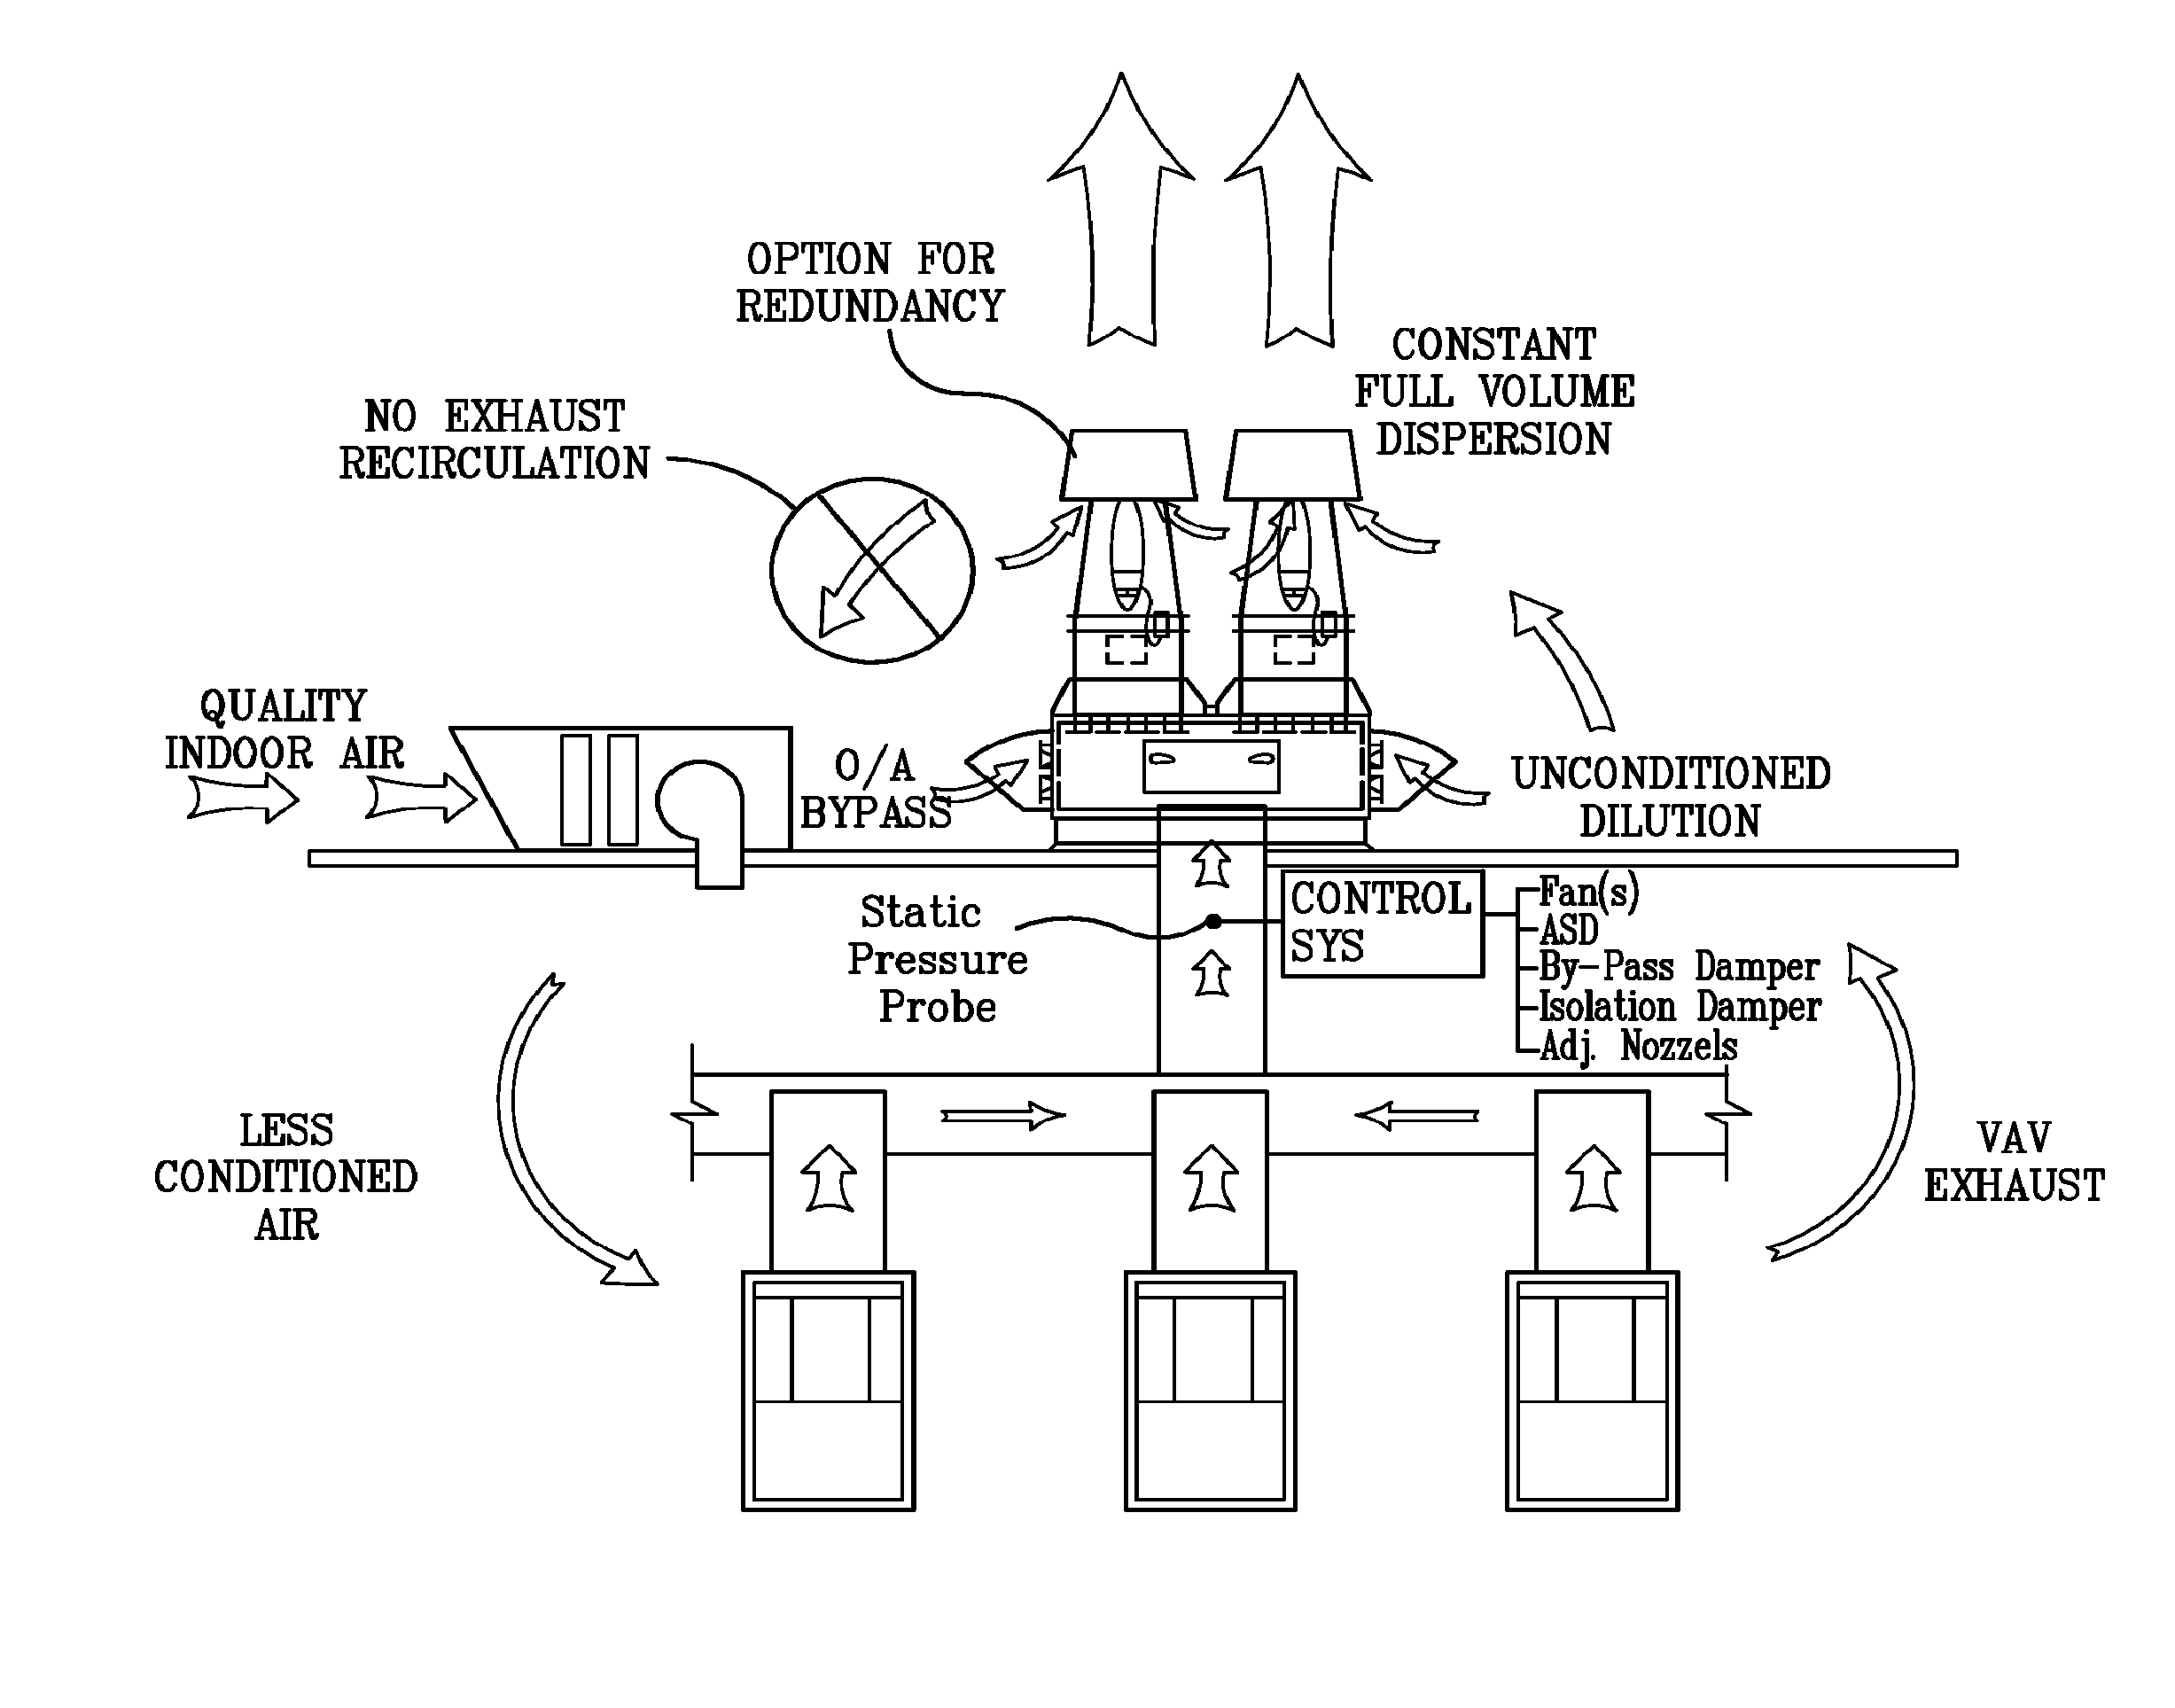 Control system for exhaust gas fan system